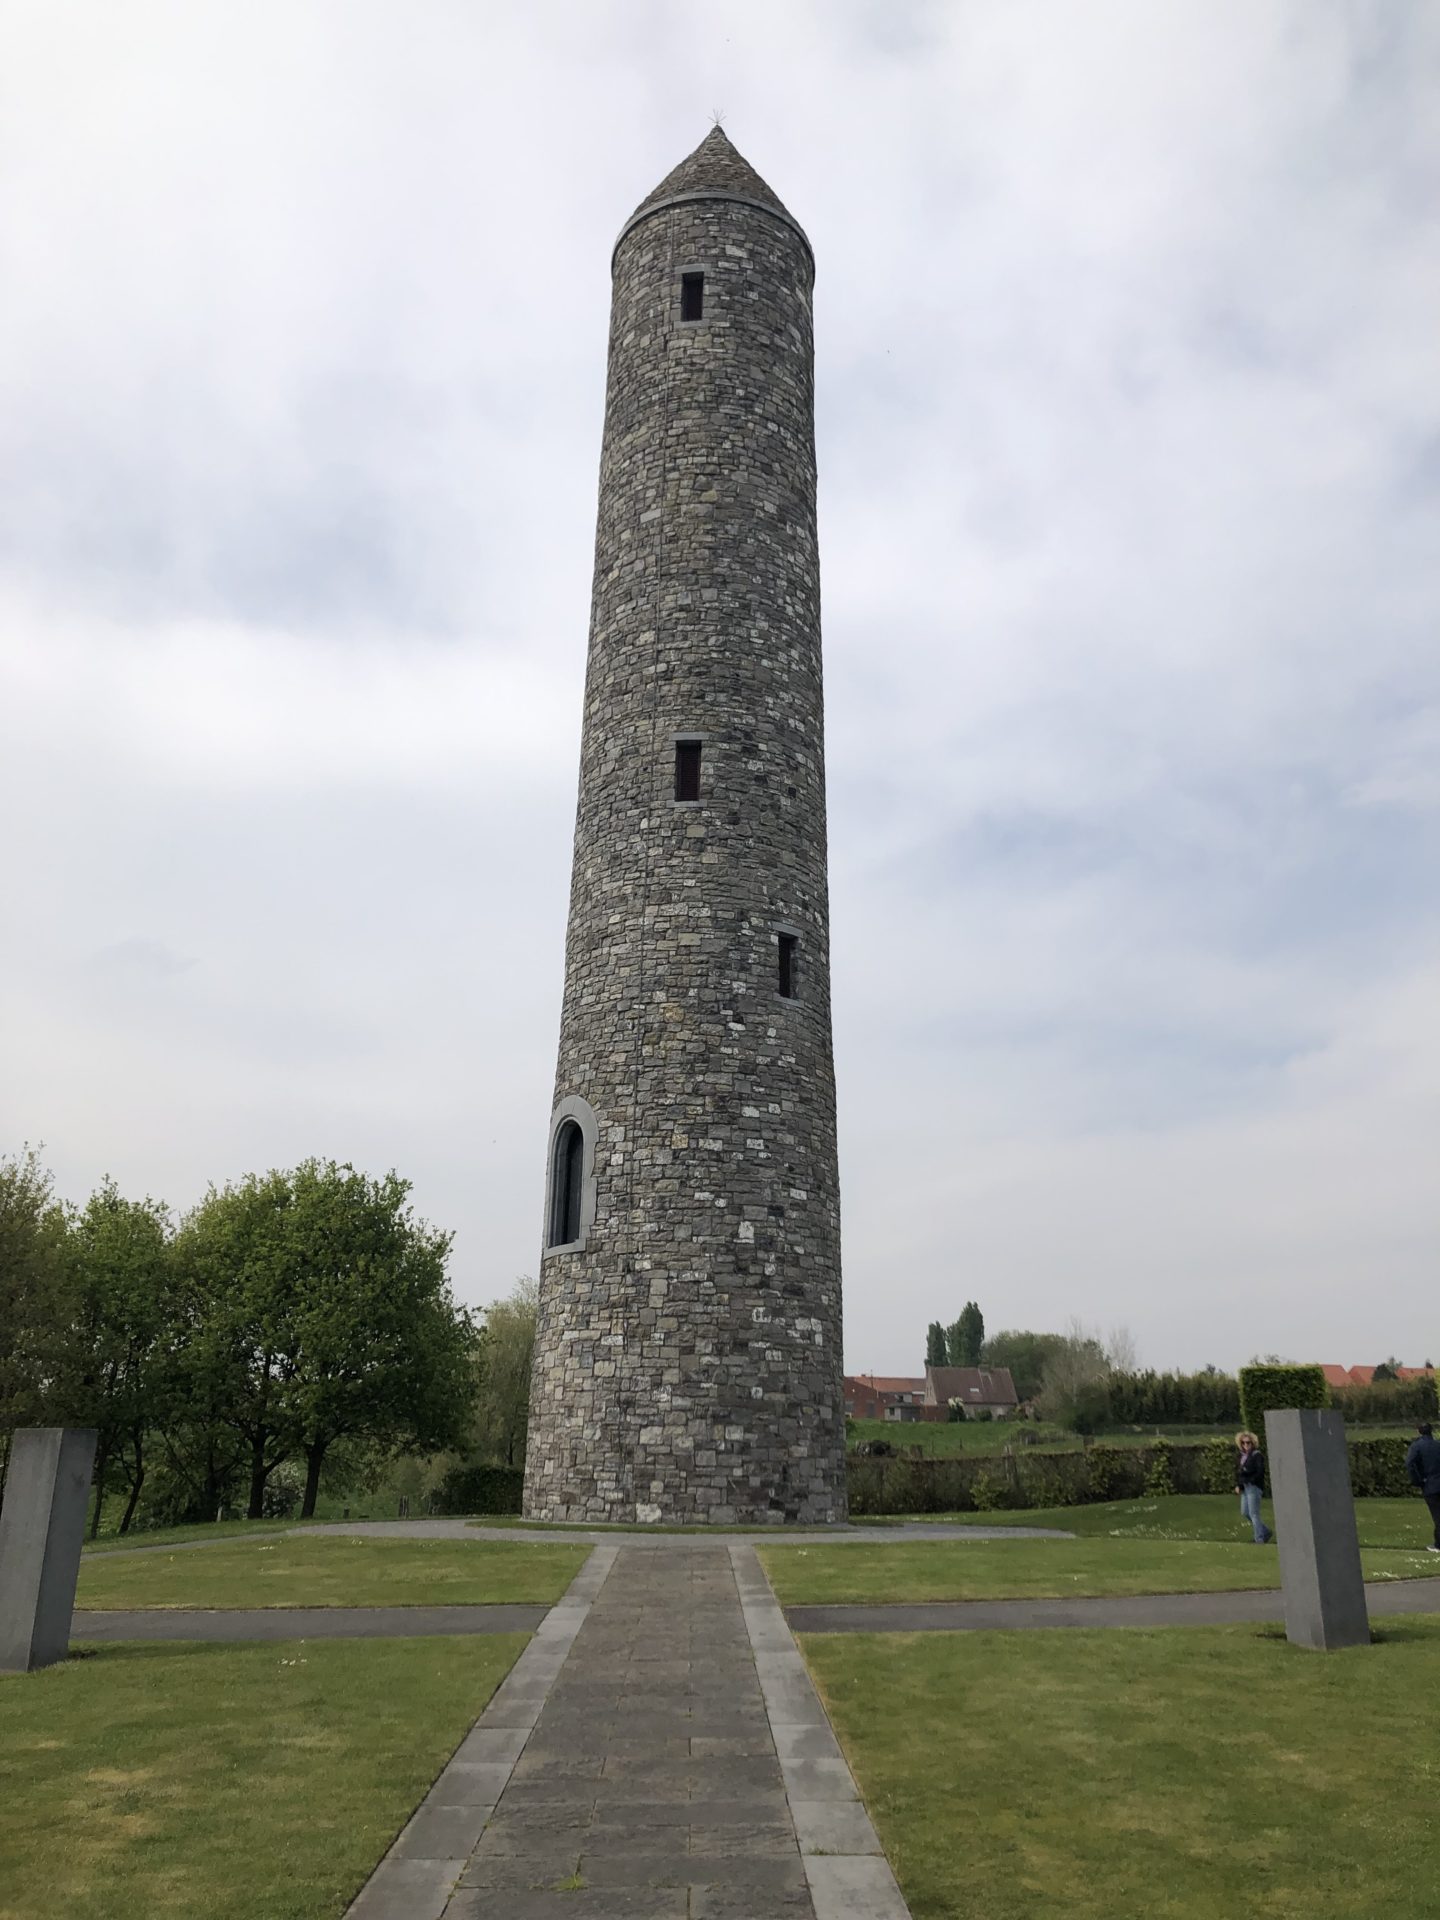 The tower in the Island of Ireland Peace Park in Flanders, Belgium